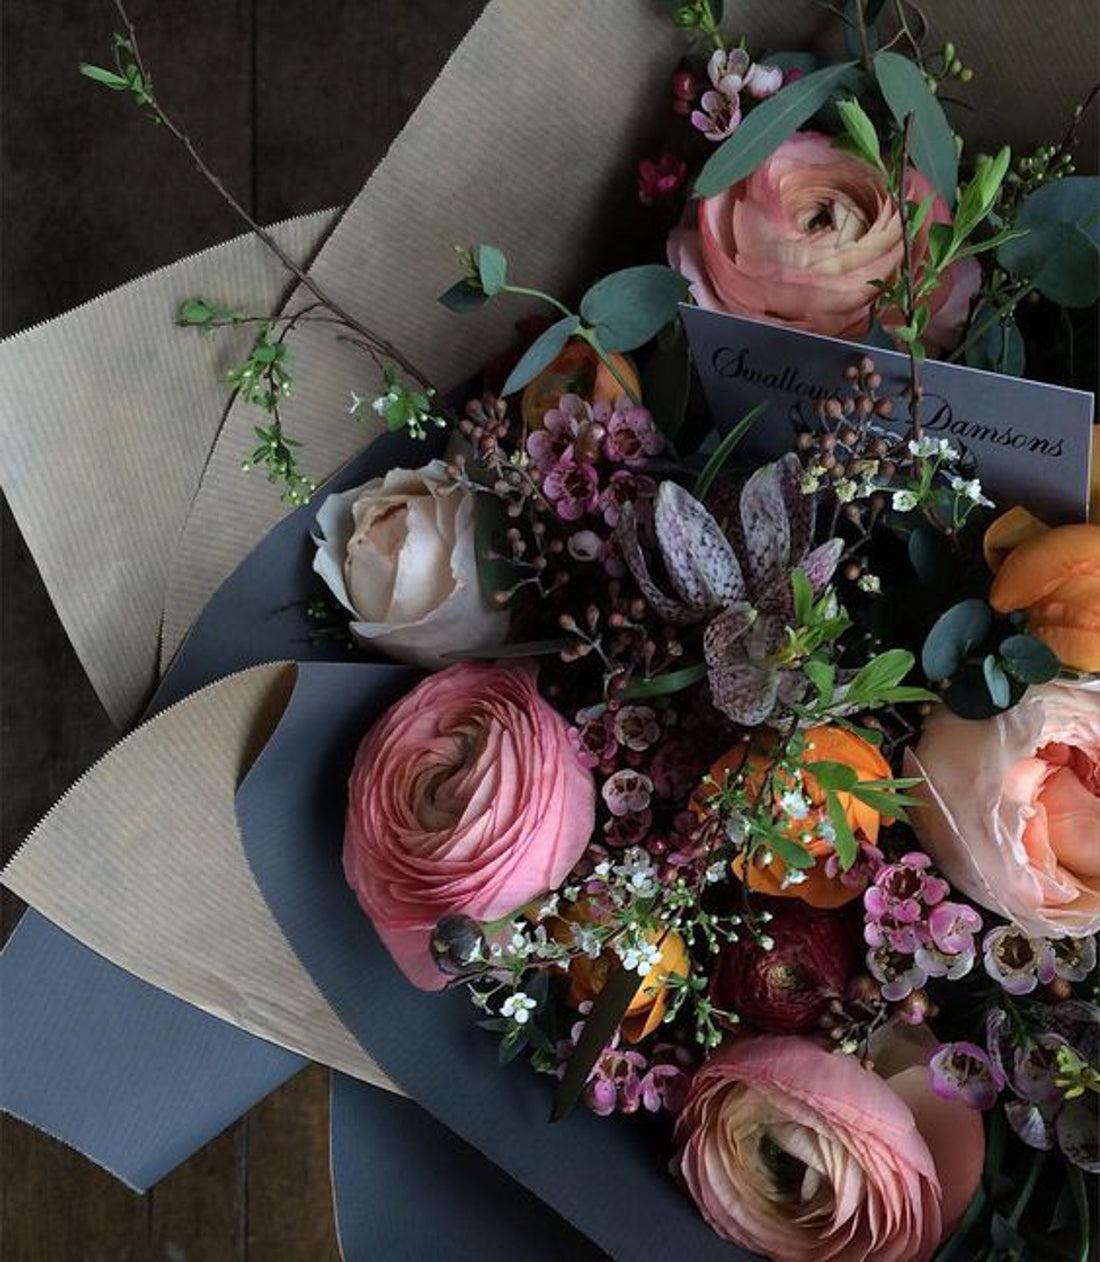 Inspiration: Instagram Florals - 5 Floral Accounts You Need to Follow on Instagram